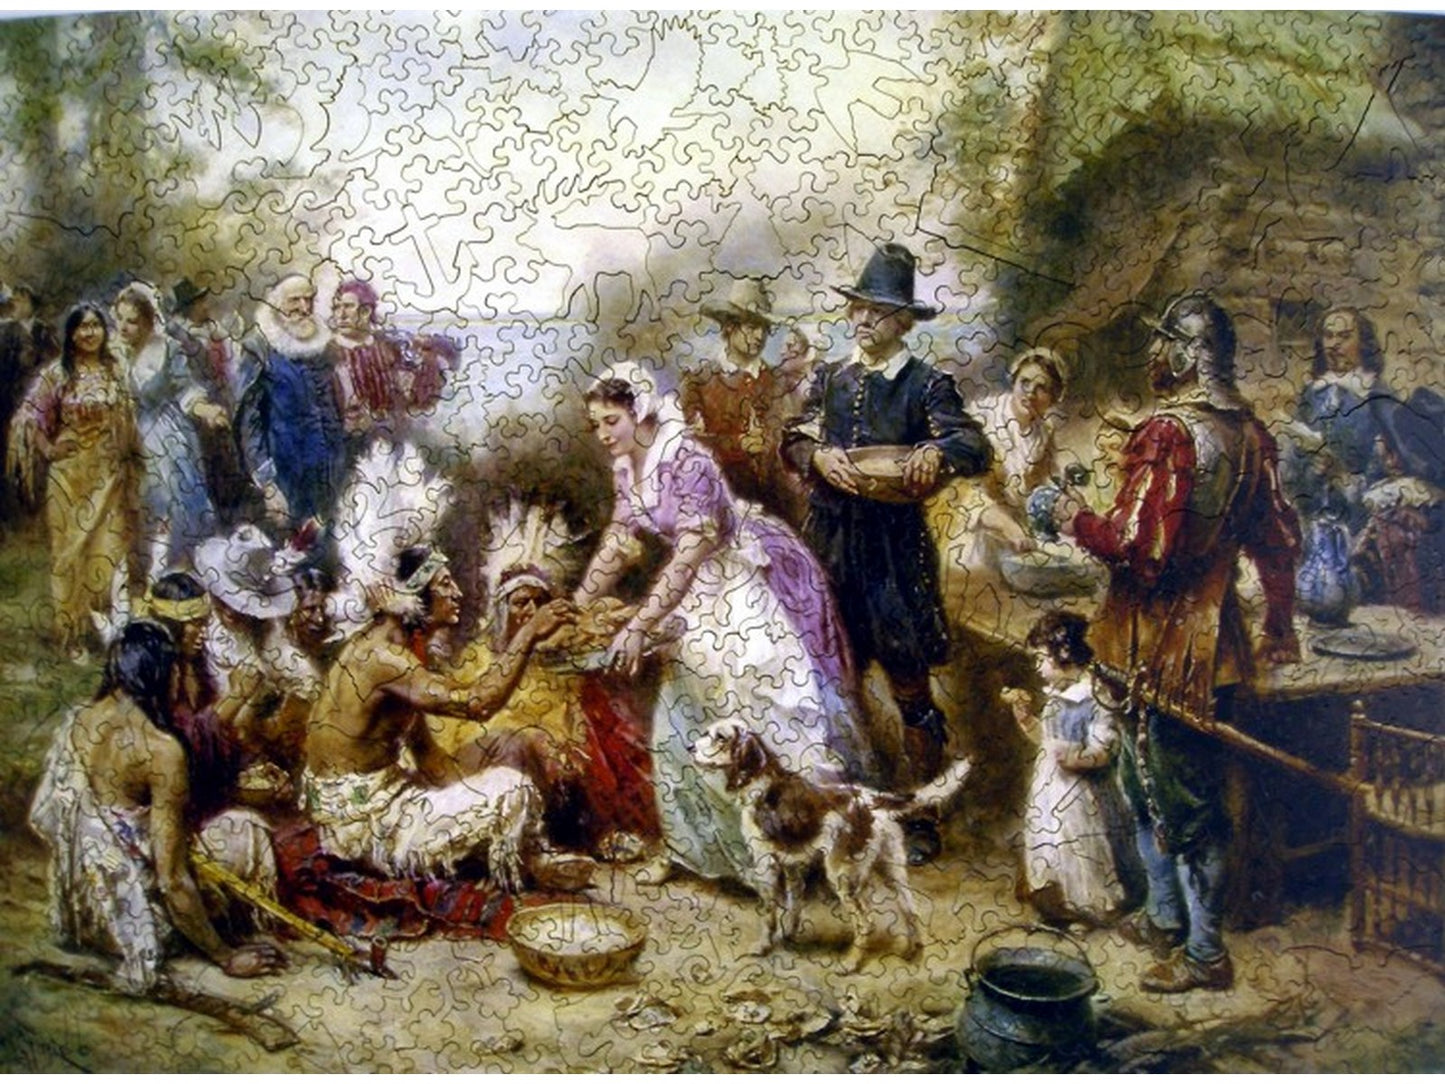 The front of the puzzle, The First Thanksgiving, 1621, which shows a group of people having a feast.